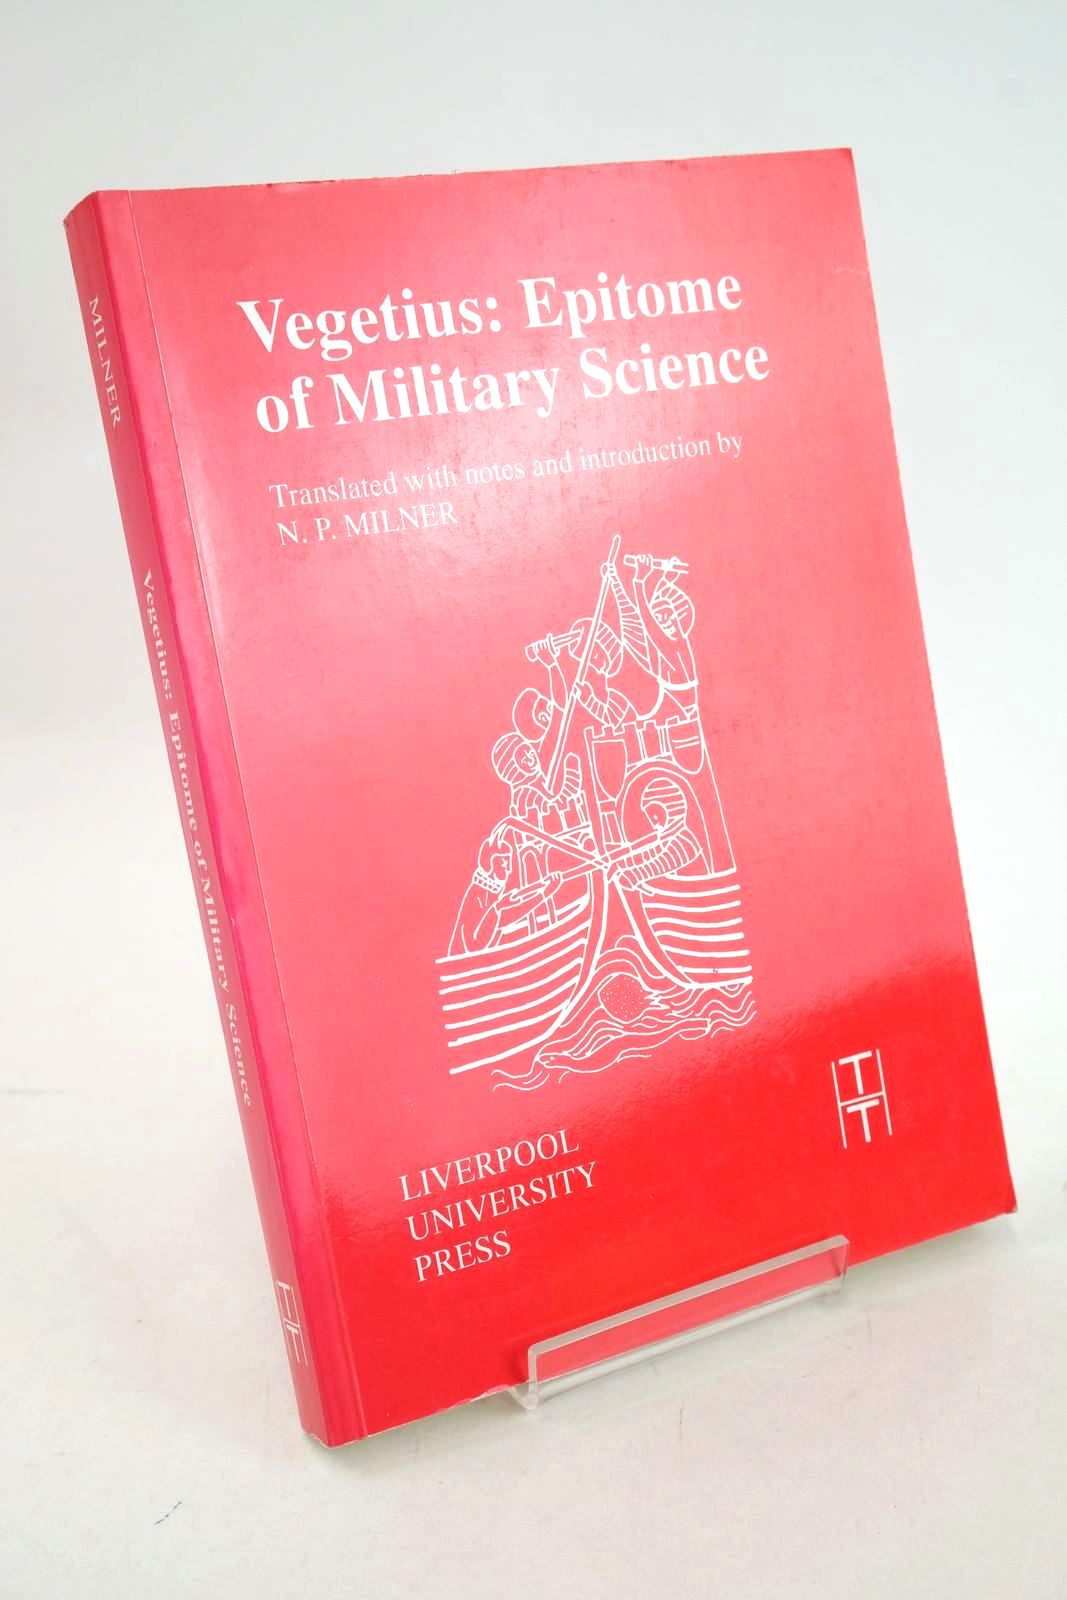 Photo of VEGETIUS: EPITOME OF MILITARY SCIENCE written by Vegetius, Milner, N.P. published by Liverpool University Press (STOCK CODE: 1326906)  for sale by Stella & Rose's Books